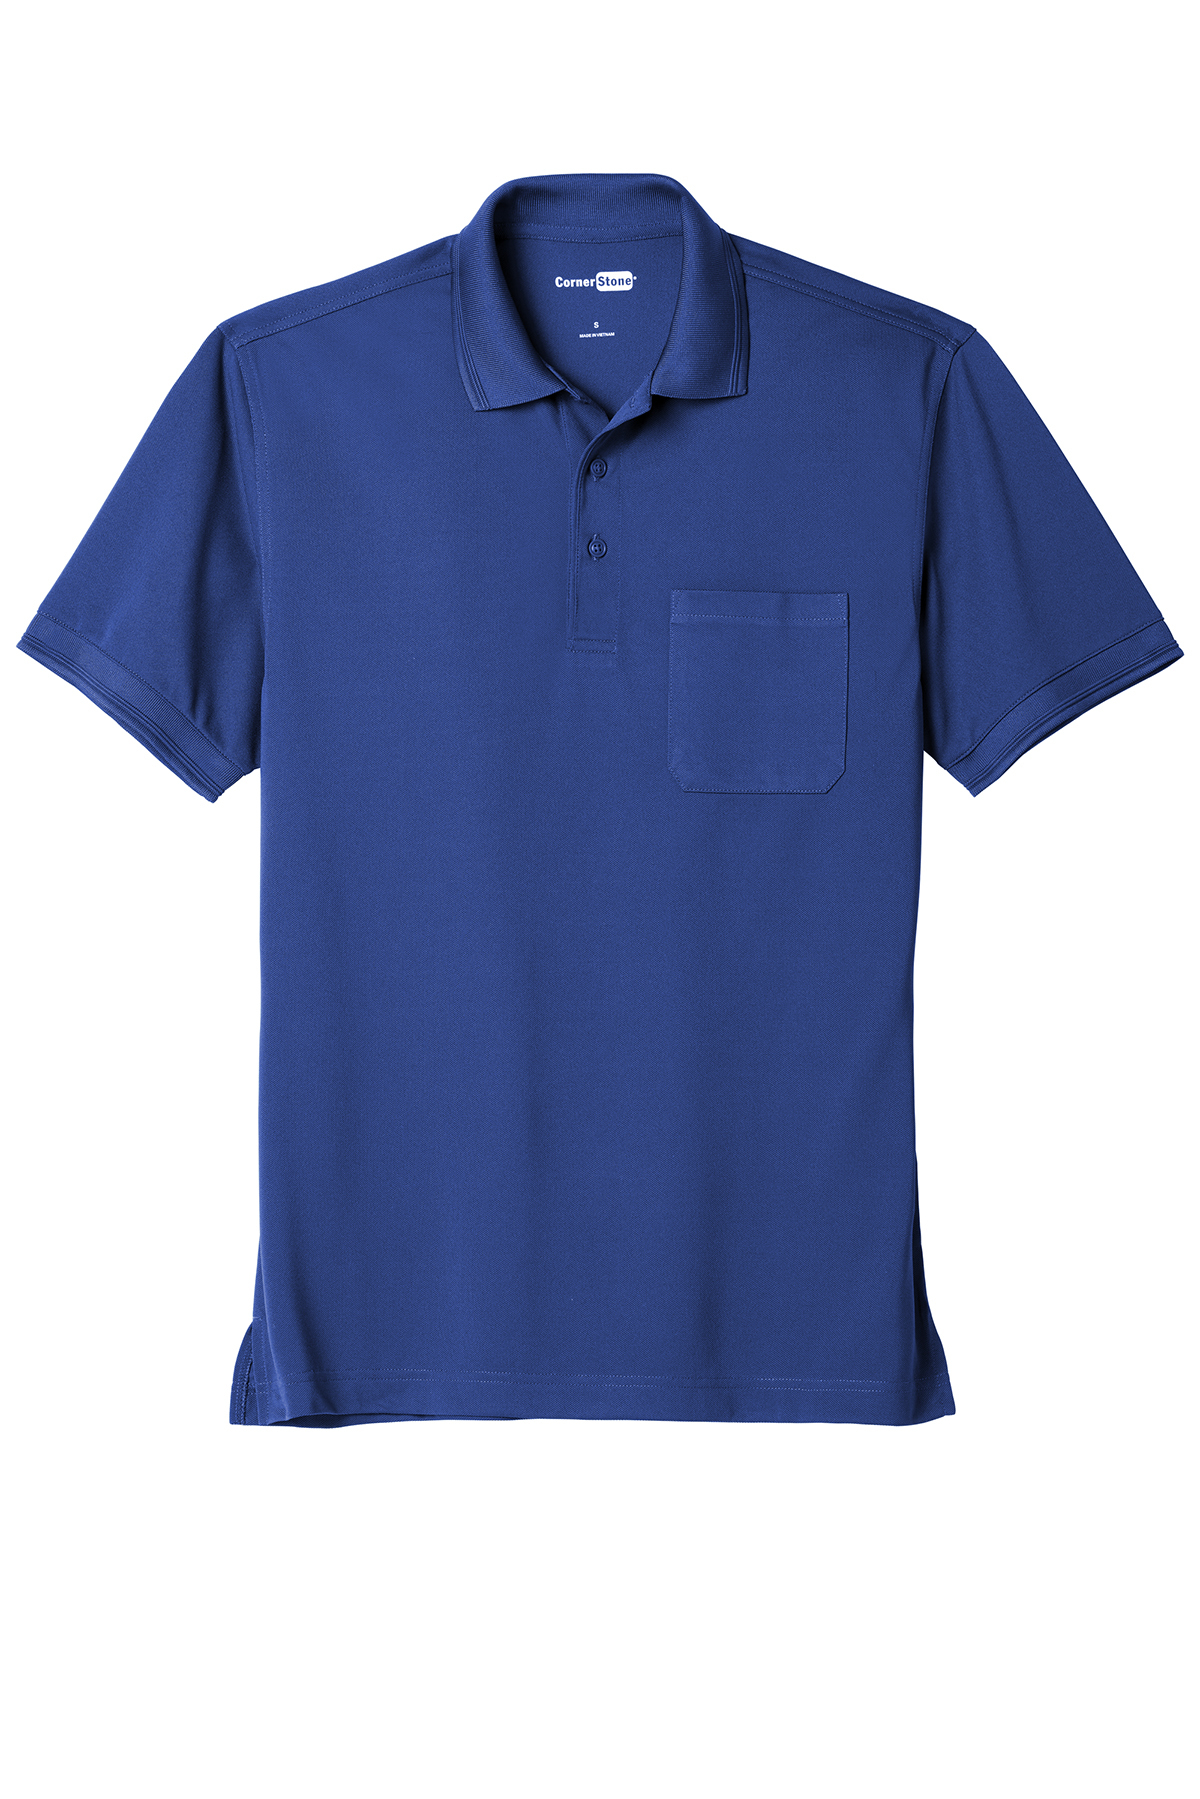 CornerStone Industrial Snag-Proof Pique Pocket Polo | Product | SanMar